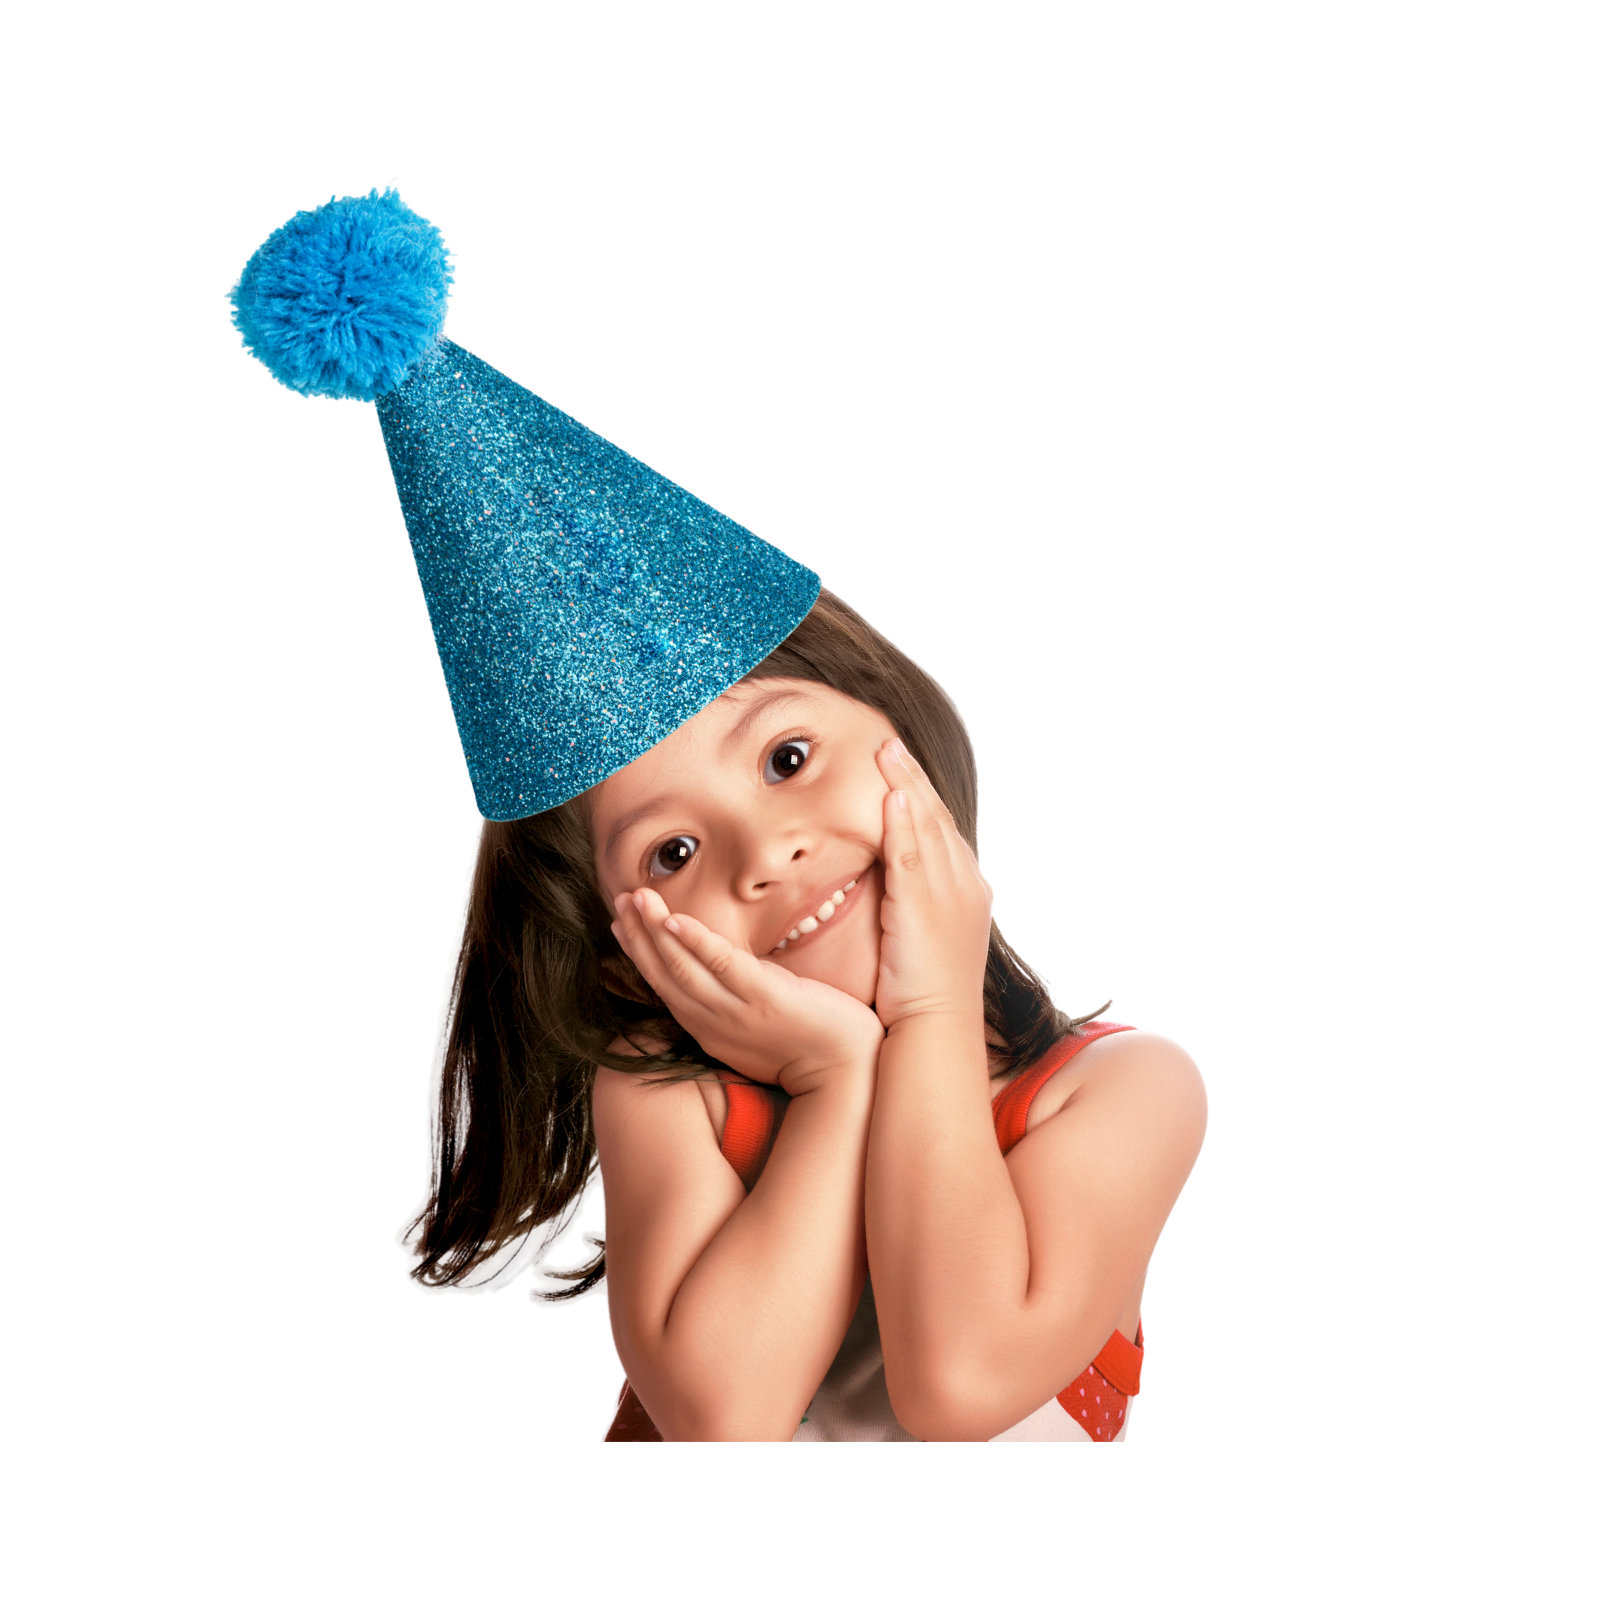 Child wearing a fun winter themed party hat